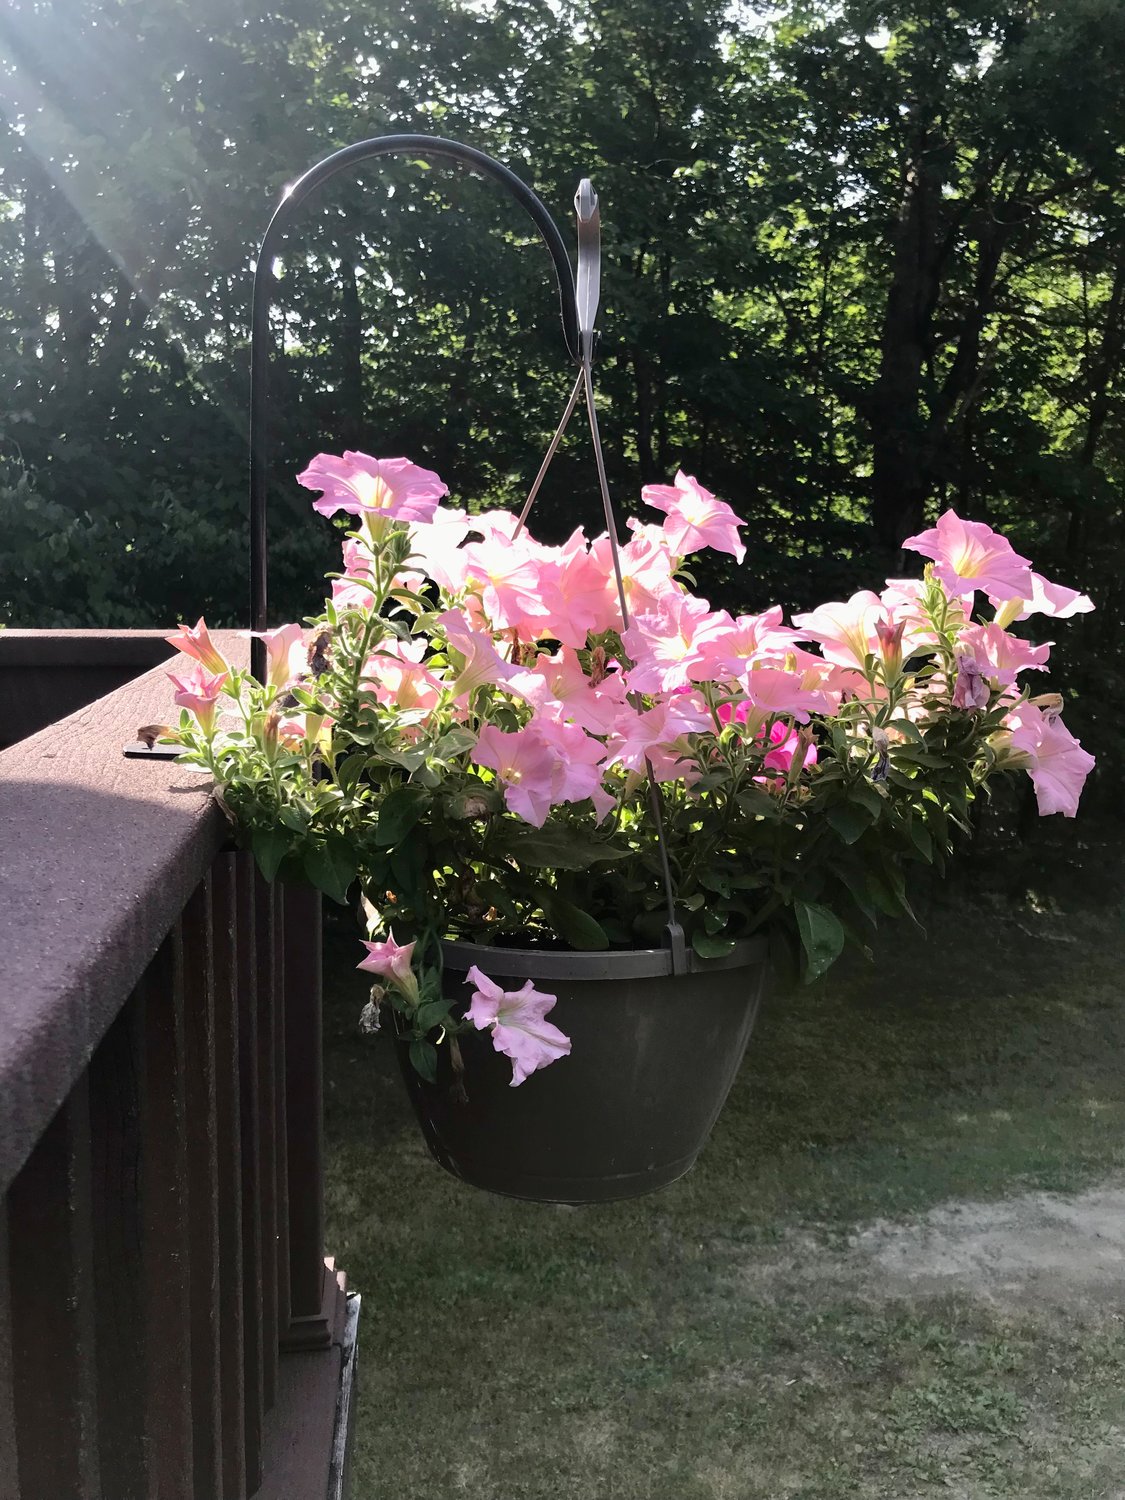 Hanging baskets are easy and beautiful, but require care...